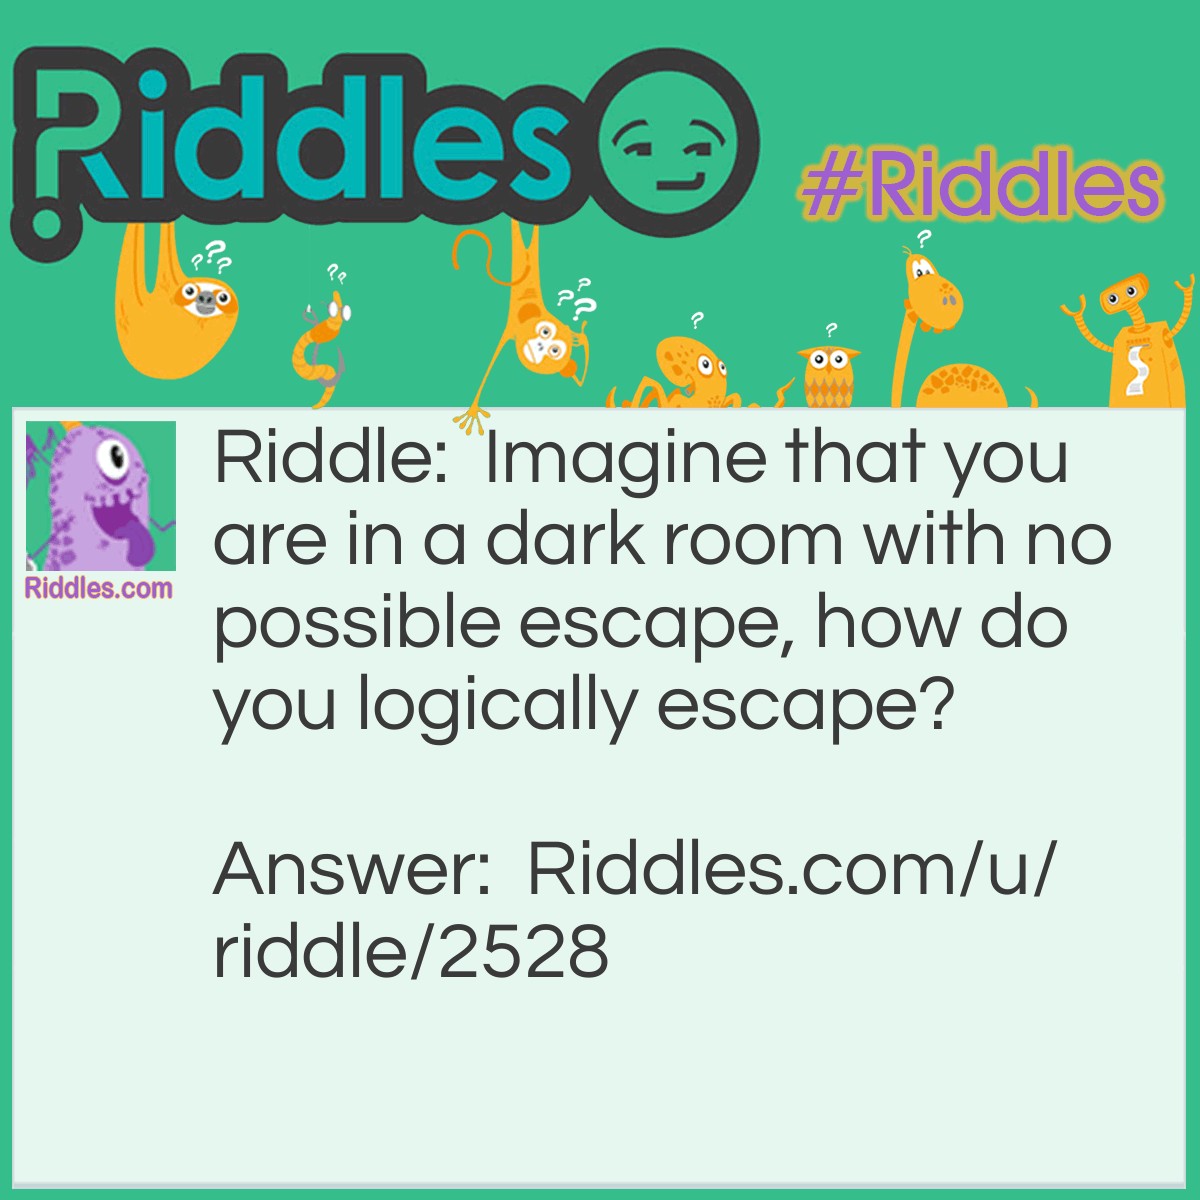 Riddle: Imagine that you are in a dark room with no possible escape, how do you logically escape? Answer: Stop imagining!